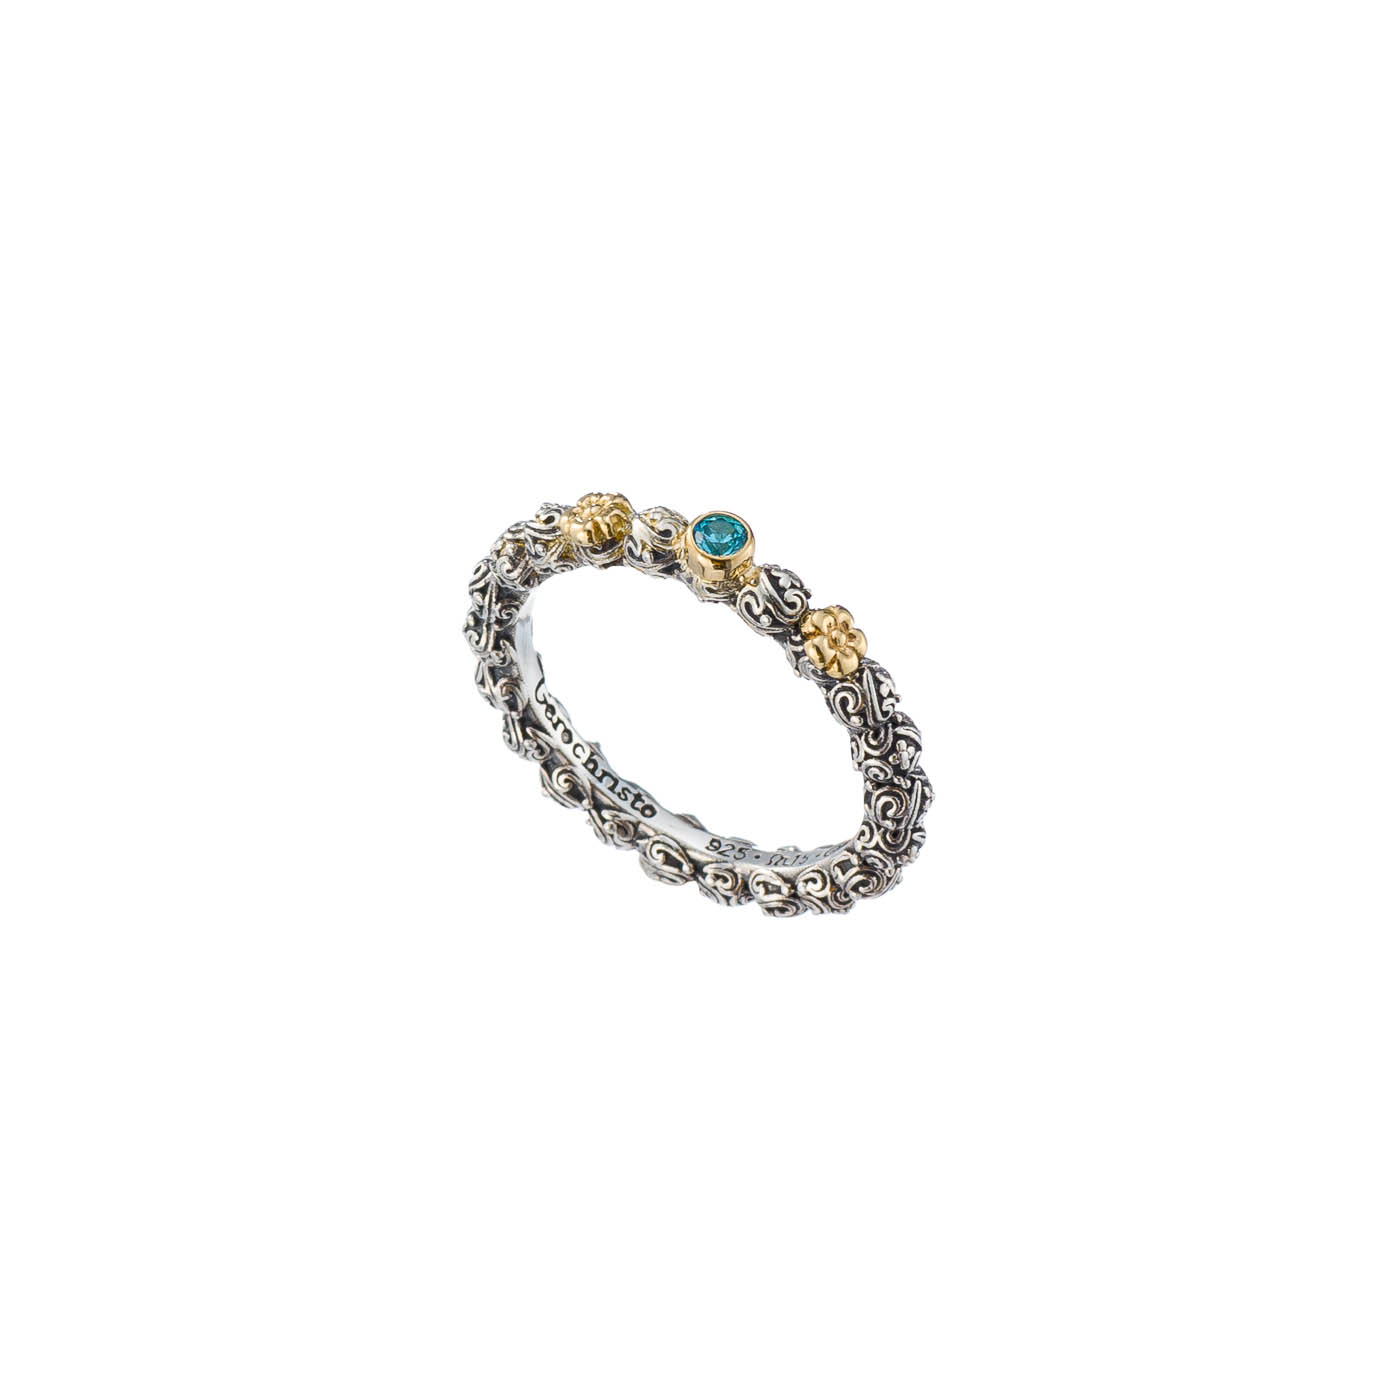 Eve band ring in sterling silver with Gold K18 details